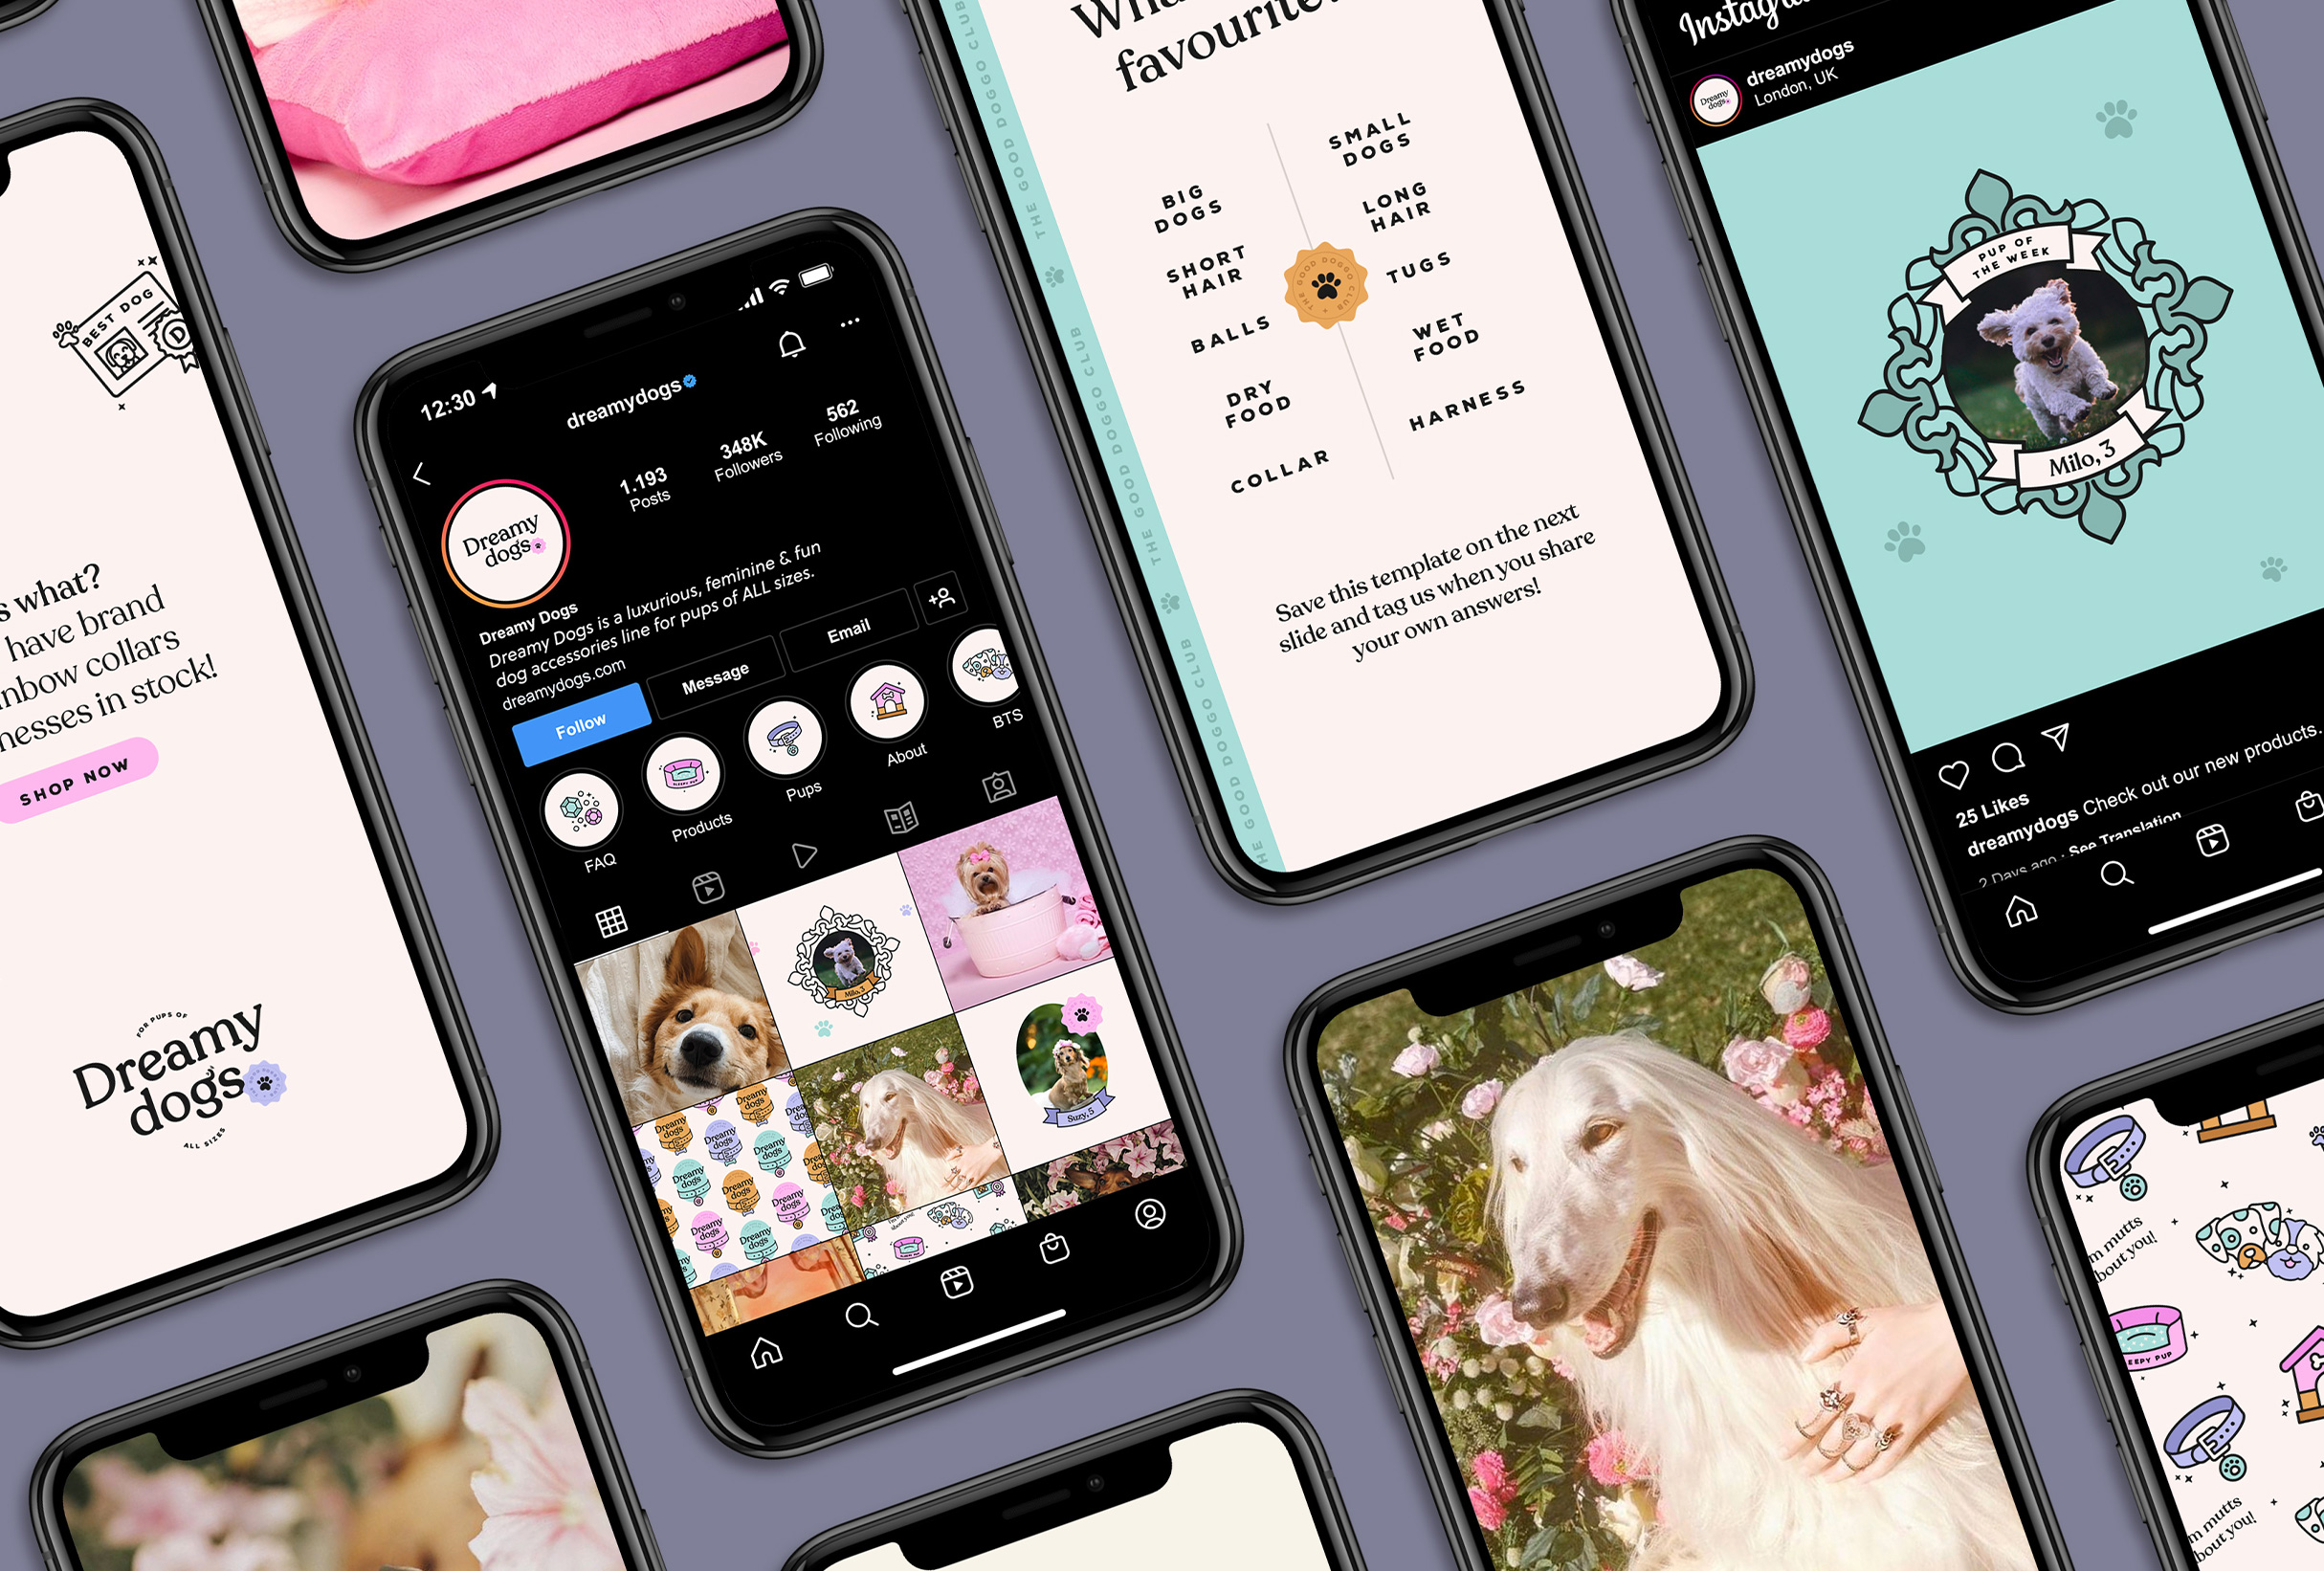 Instagram strategy for Dreamy Dogs, for pups of all shapes and sizes - designed by Wiltshire-based graphic designer